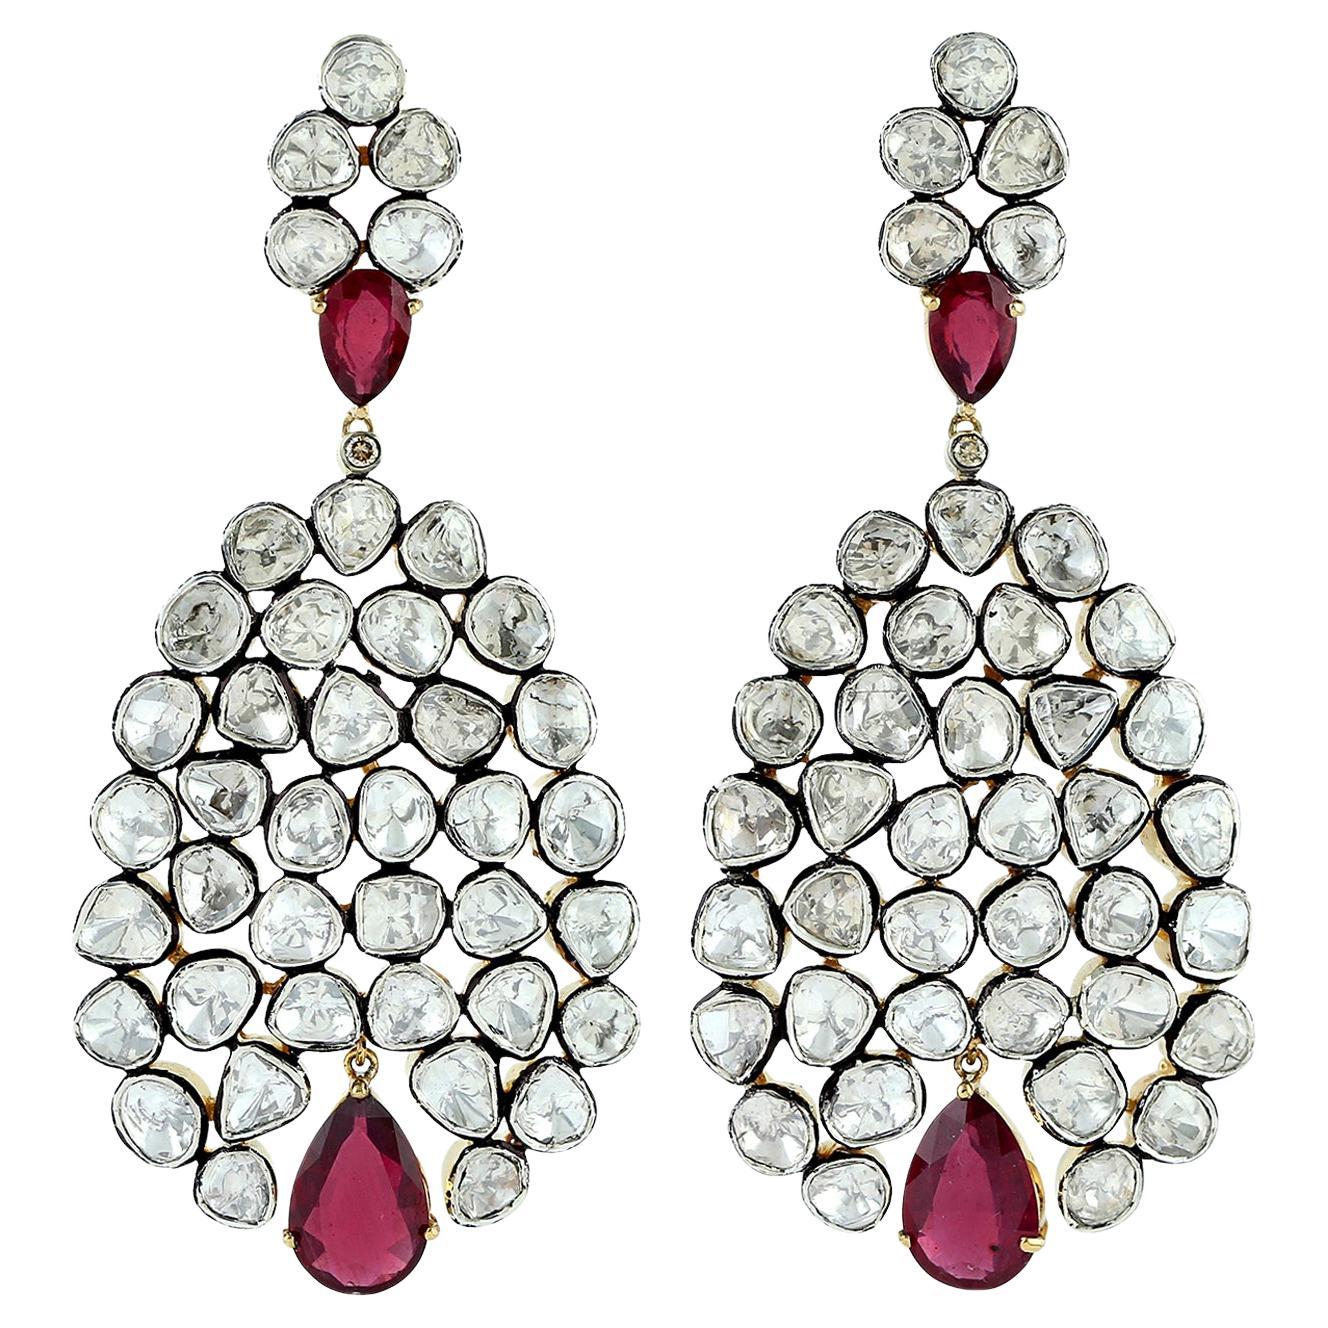 17.48ct Rosecut Diamonds Dangle Ears With Ruby In 18k yellow Gold & Silver